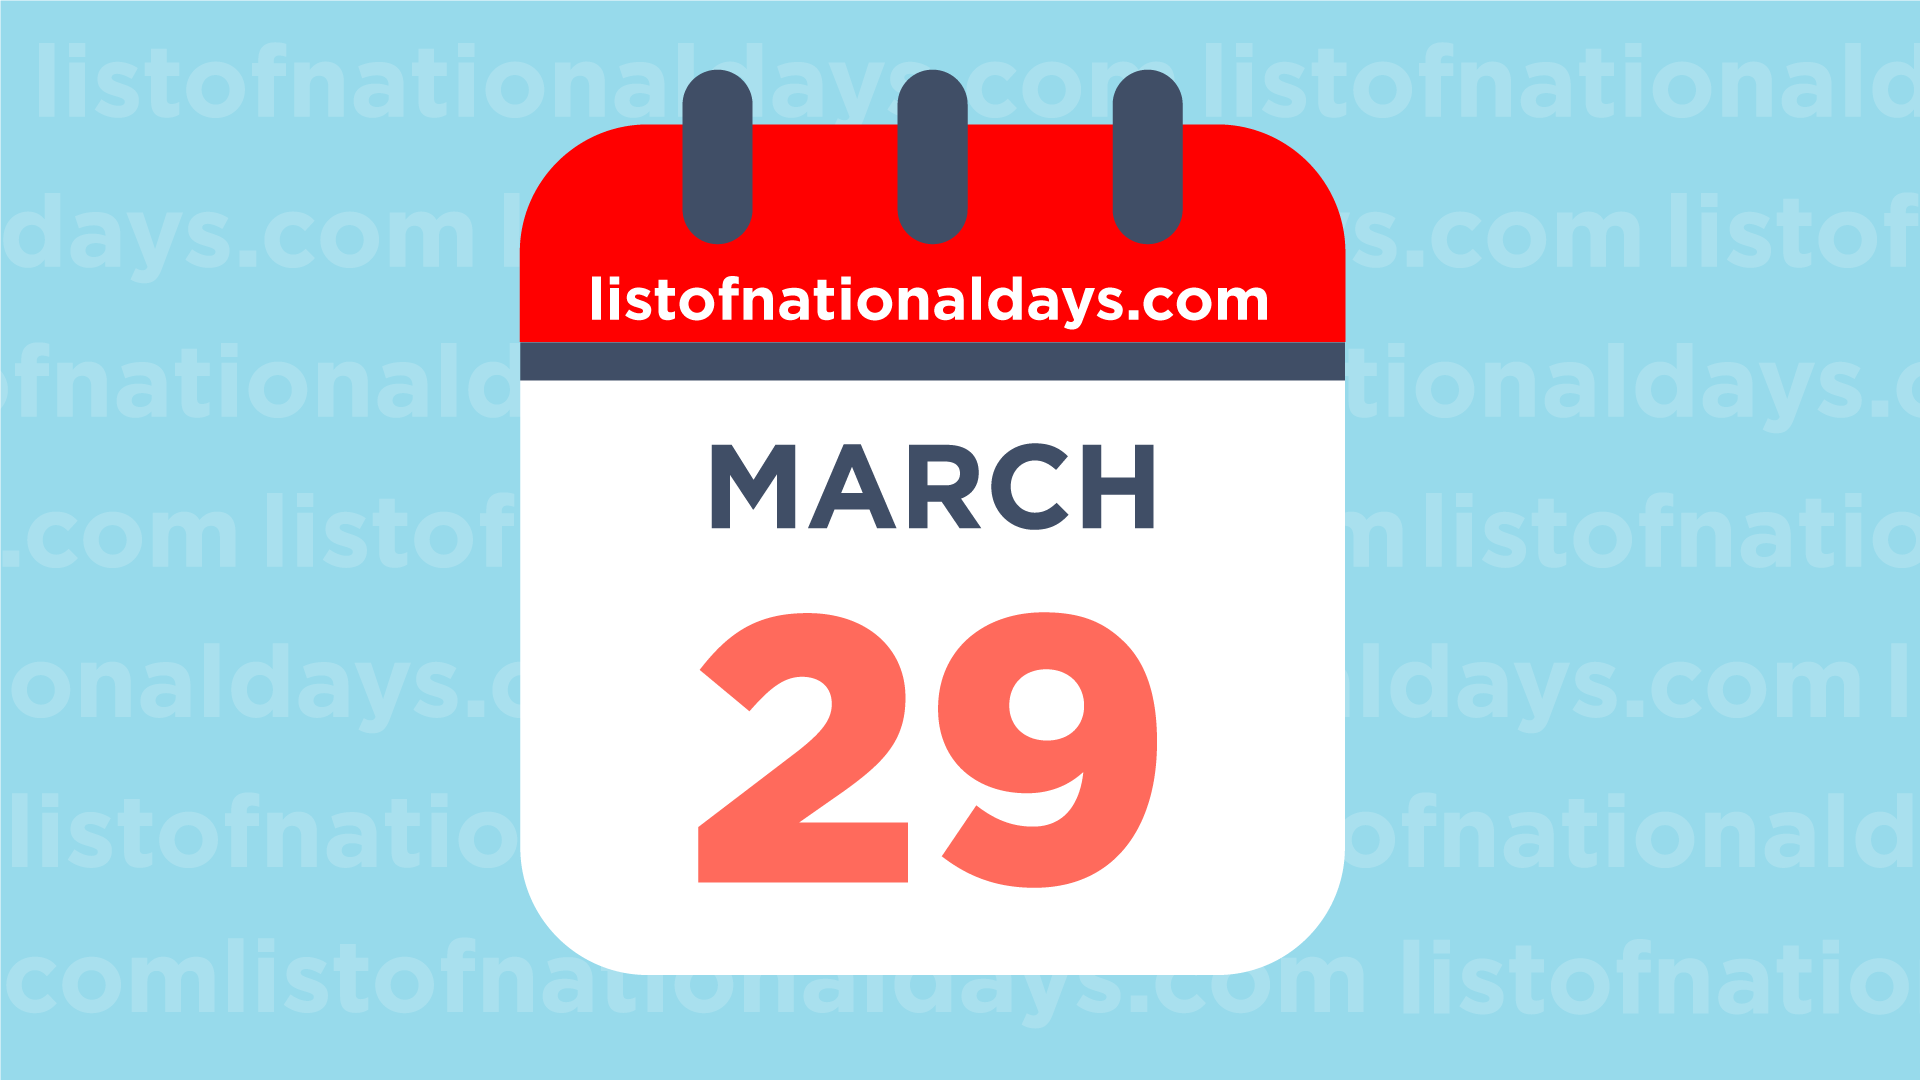 MARCH 29TH National Holidays, Observances & Famous Birthdays